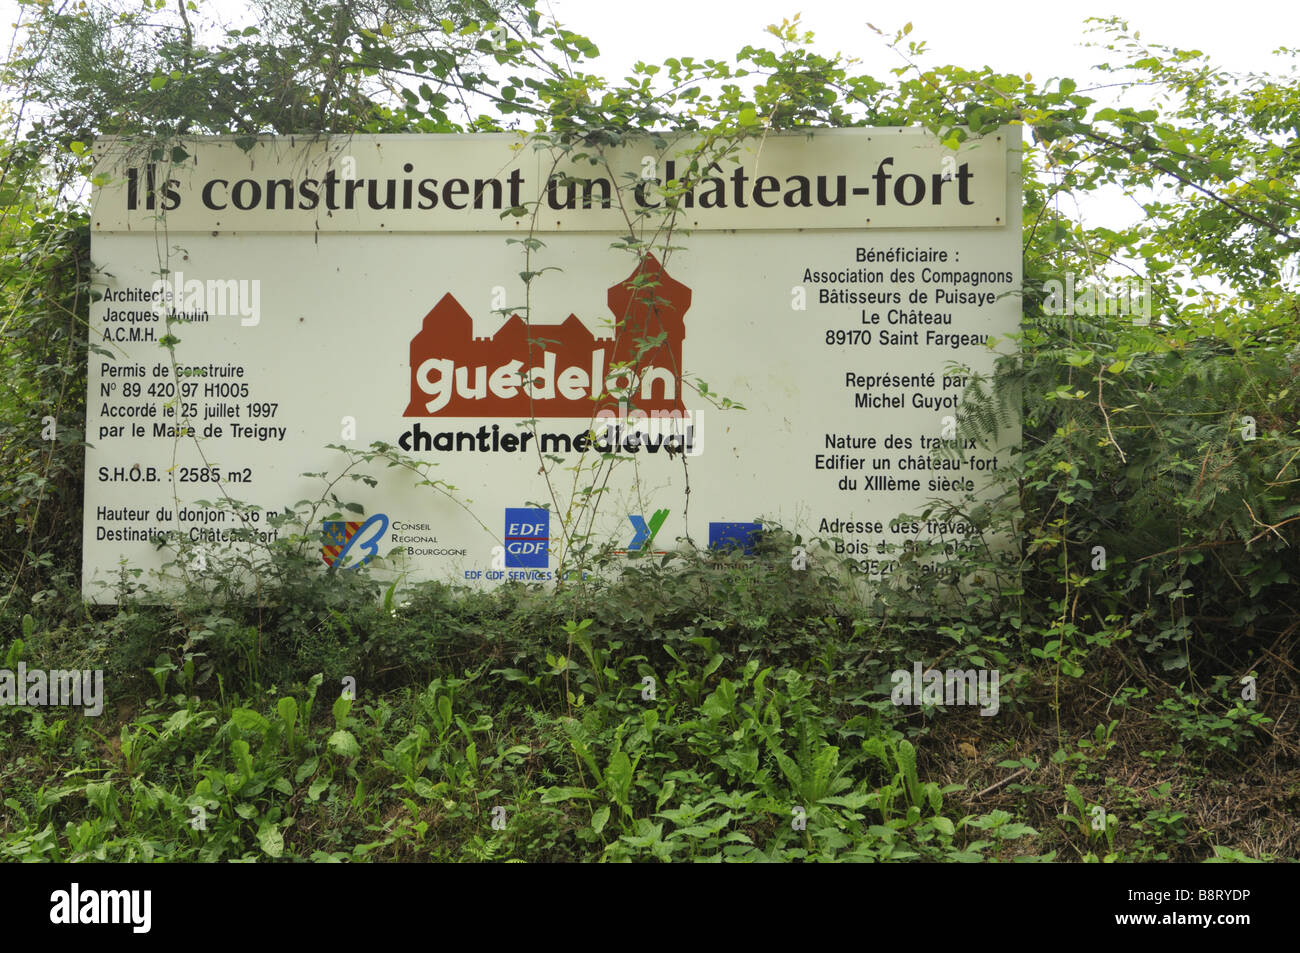 Guedelon medieval construction site Burgundy France Stock Photo